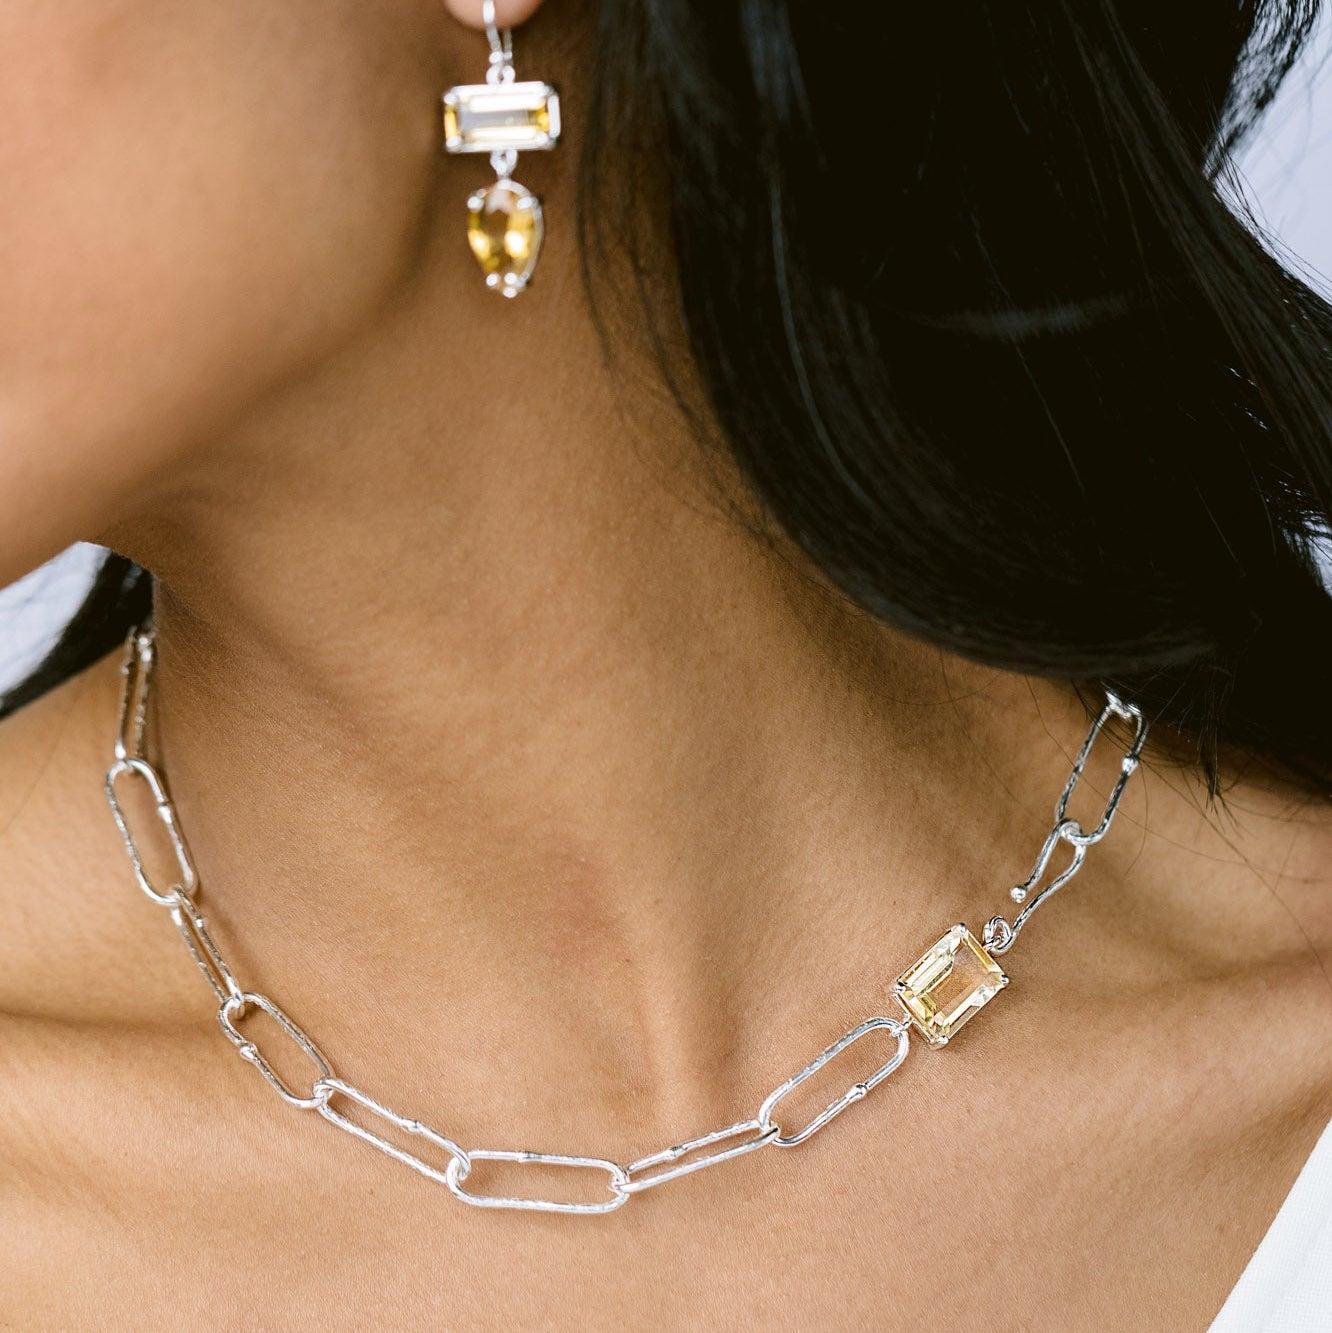 Intention: All Eyes on Me

Design: Multiple simple, understated ideas work well together in this timeless design. From the handcrafted links, to the citrine, to the self closing hook, it's hard to tell where the beauty of this choker begins and ends